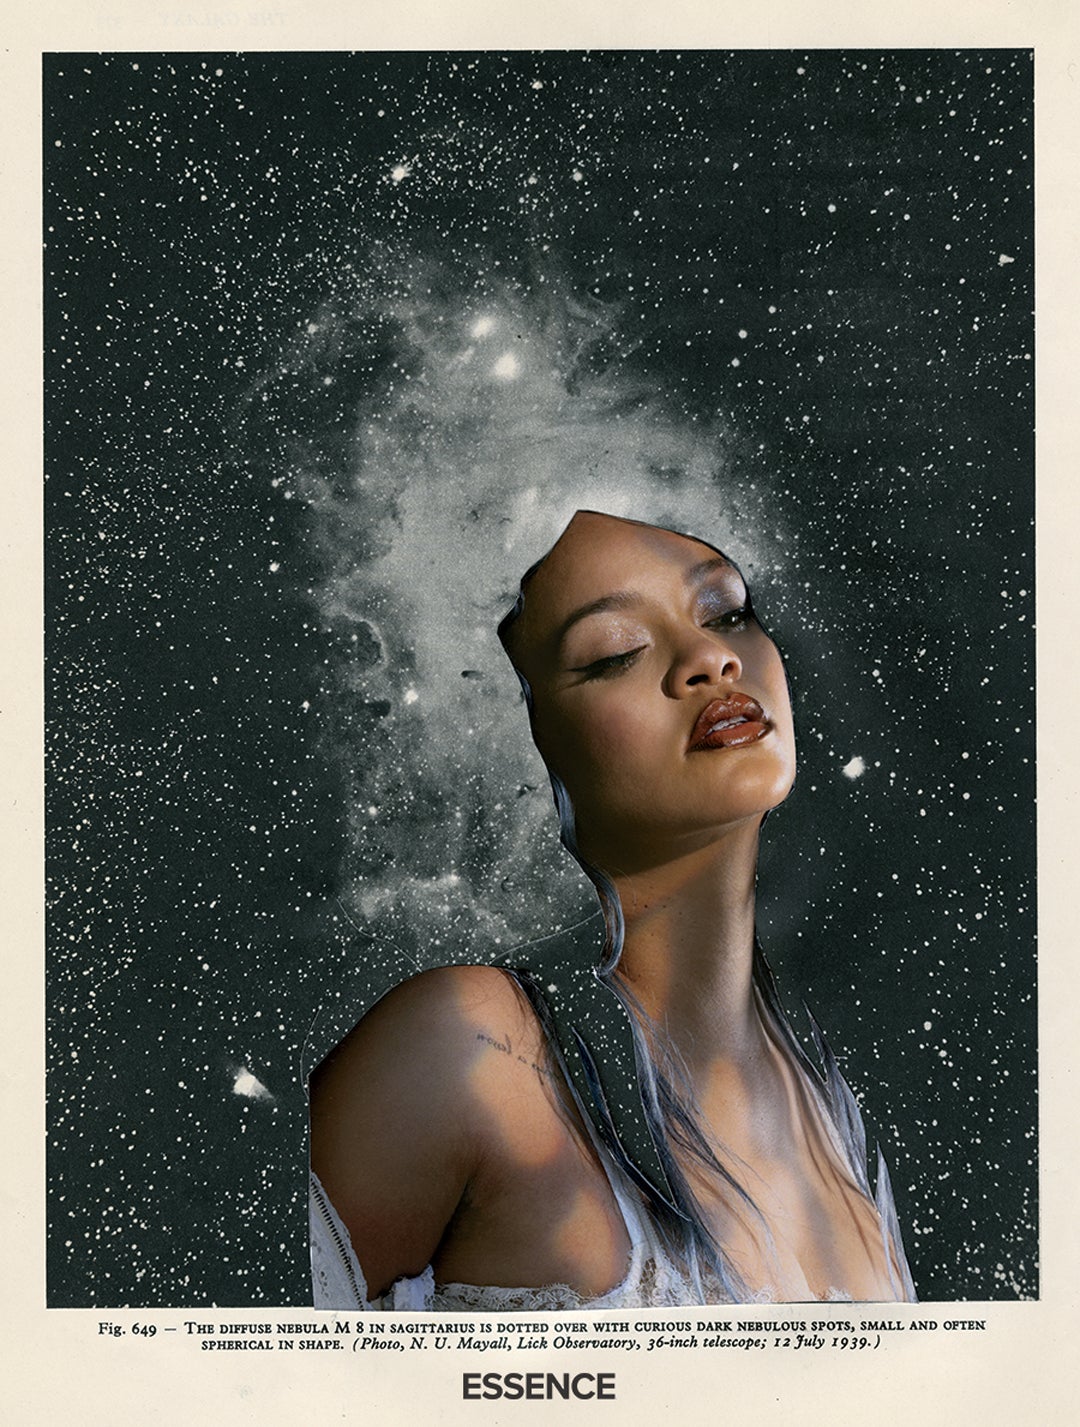 A color collage photograph features the face and upper body of pop star Rihanna imposed over a photograph of a celestial sky featuring thousands of tiny stars and the milky way as Rihanna's hair.